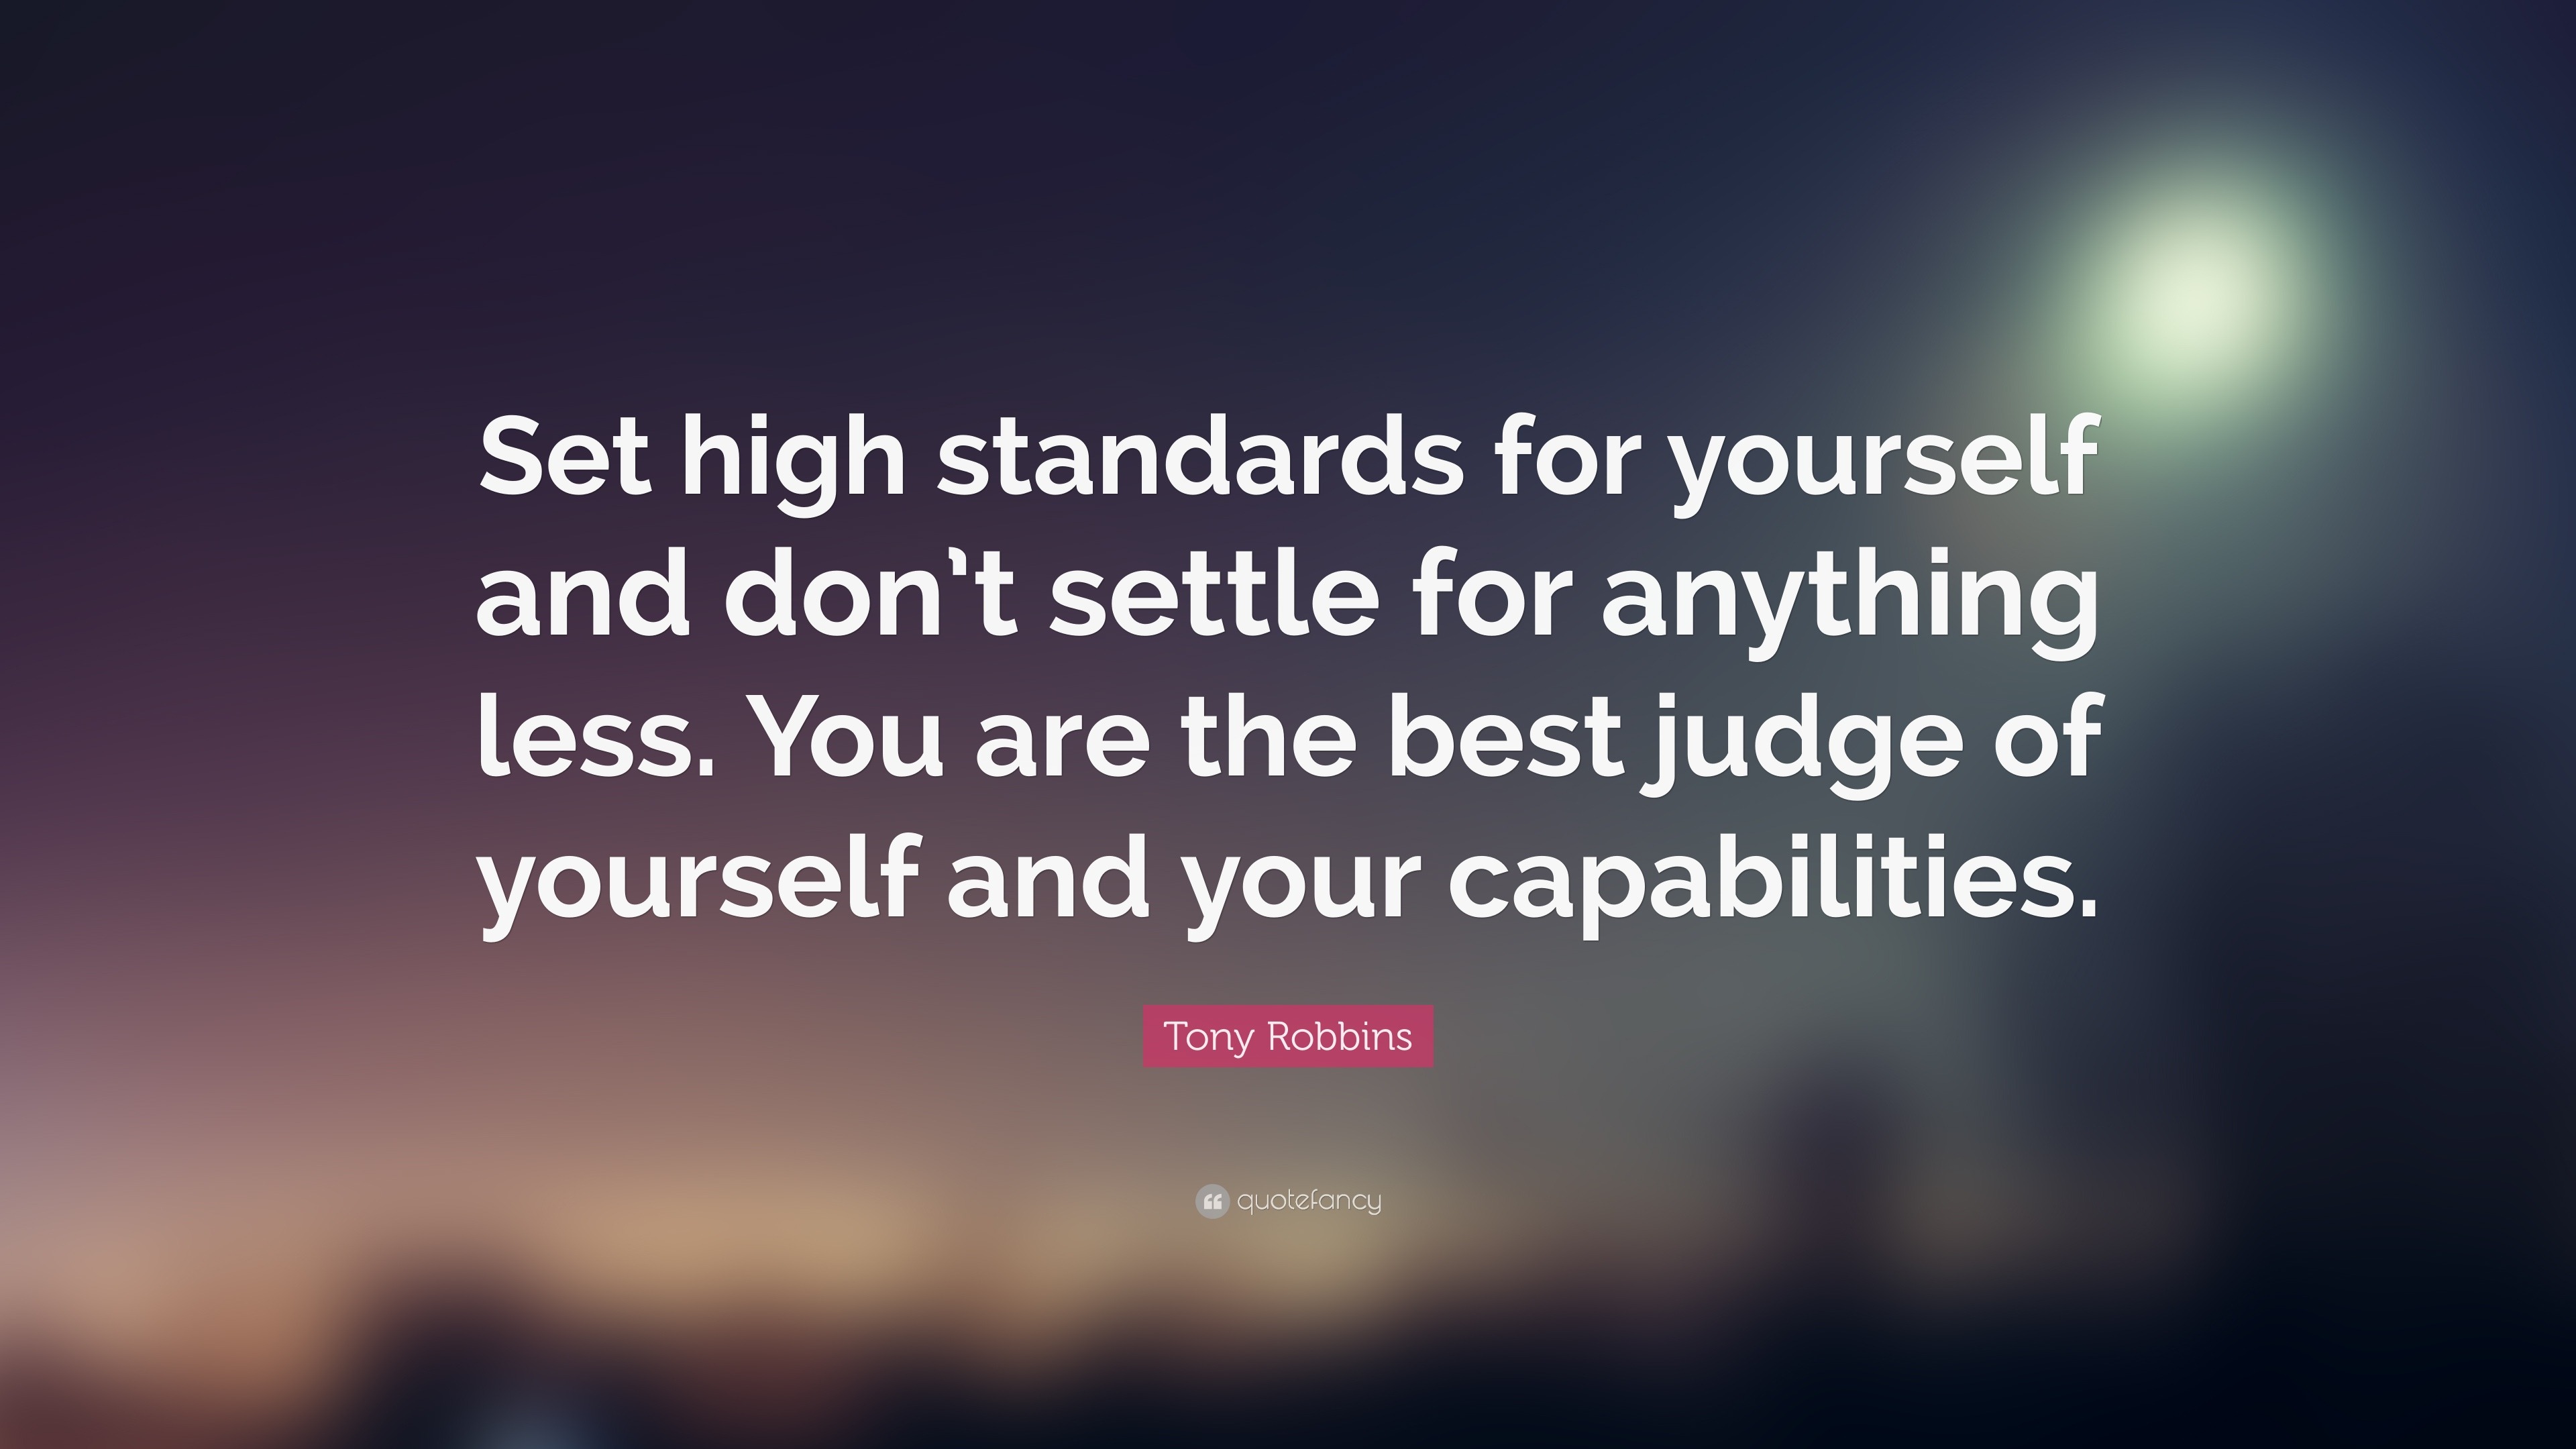 Quotes about having high standards